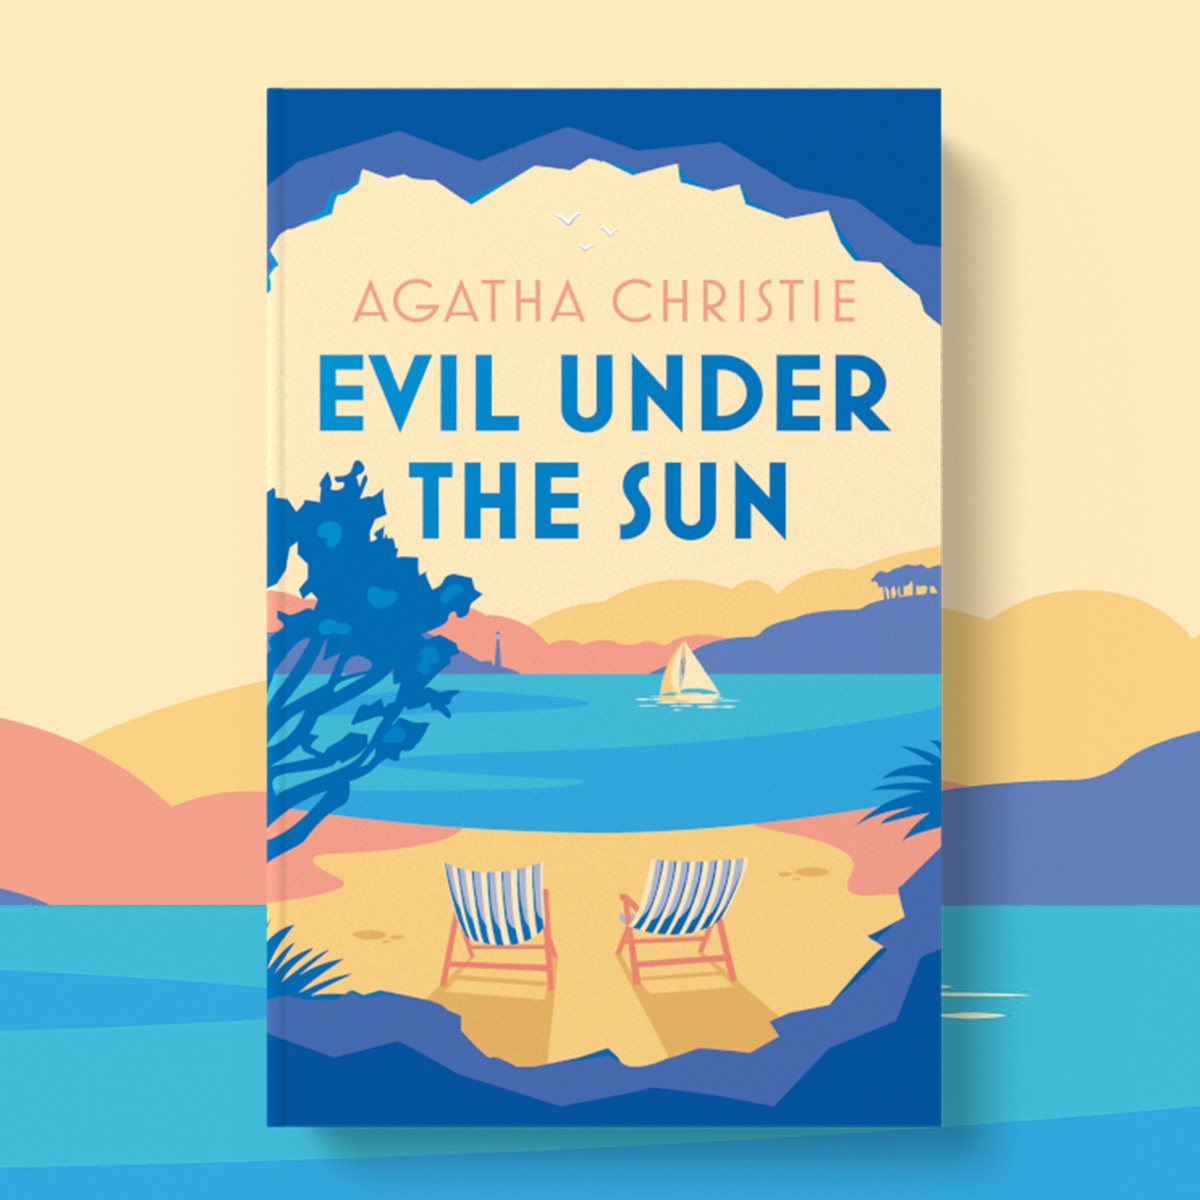 Dreaming of sunshine? 🏖️☀️ This Good Friday, we're delighted to unveil this gorgeous new hardback edition of @agathachristie's seaside murder mystery, #EvilUnderTheSun, with new cover artwork by Sarah Foster. Pre-order your copy now: harpercollins.co.uk/products/evil-…